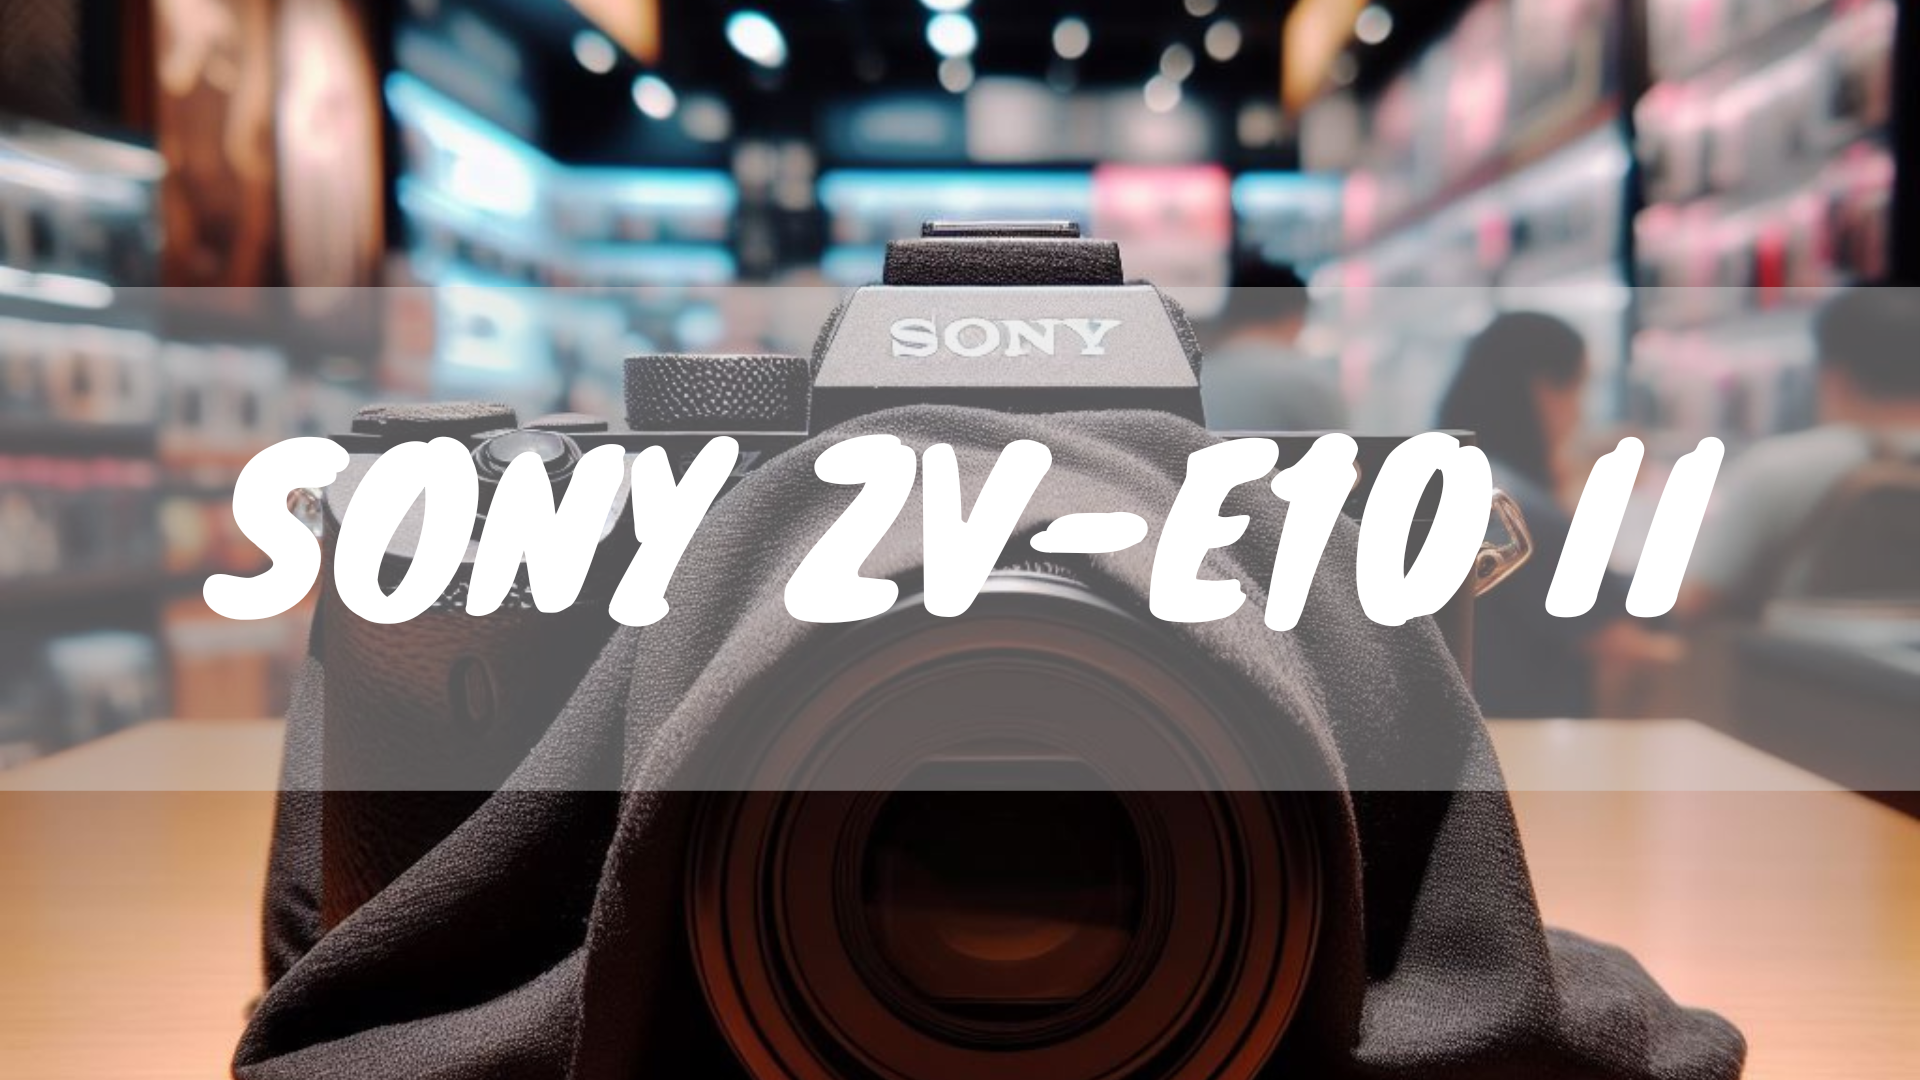 Vlogging with the Sony ZV-E10